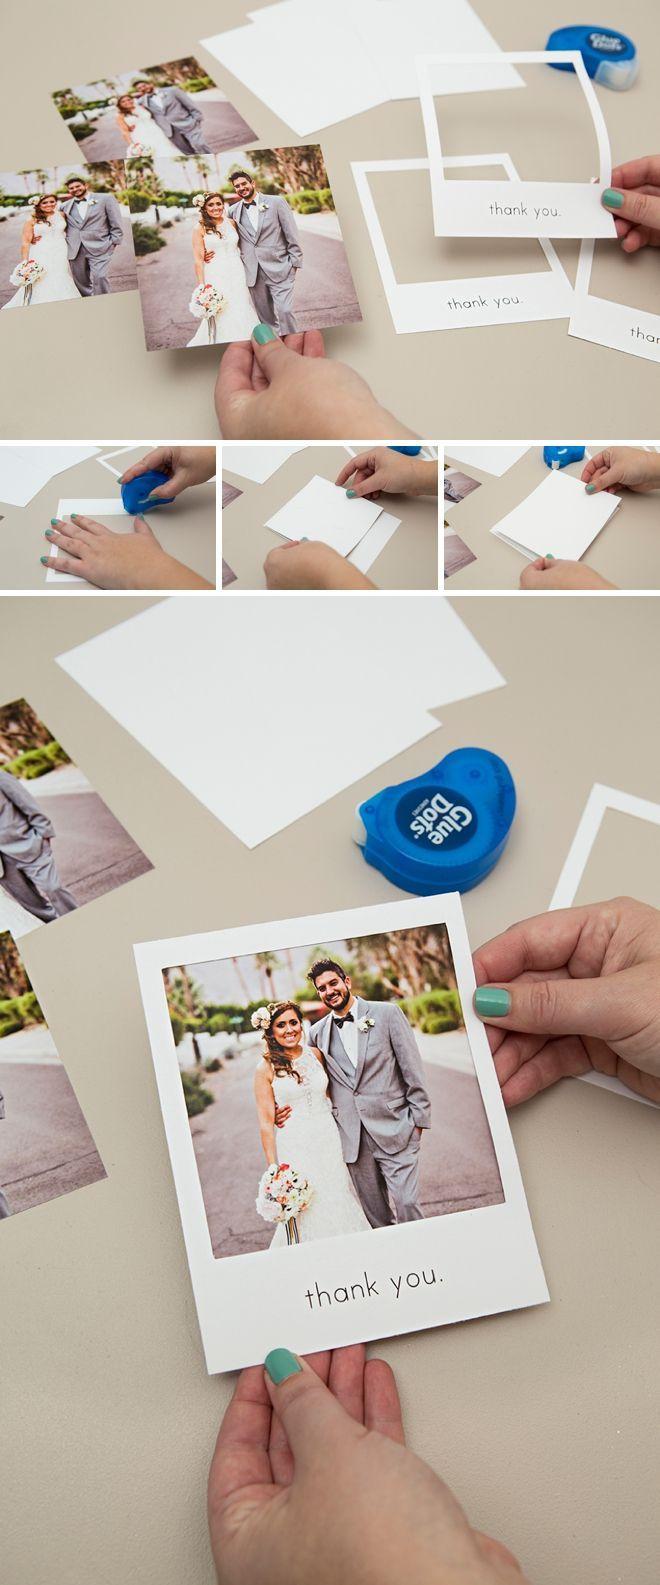 Свадьба - Check Out These Adorable DIY "Polaroid" Photo Thank You Cards!